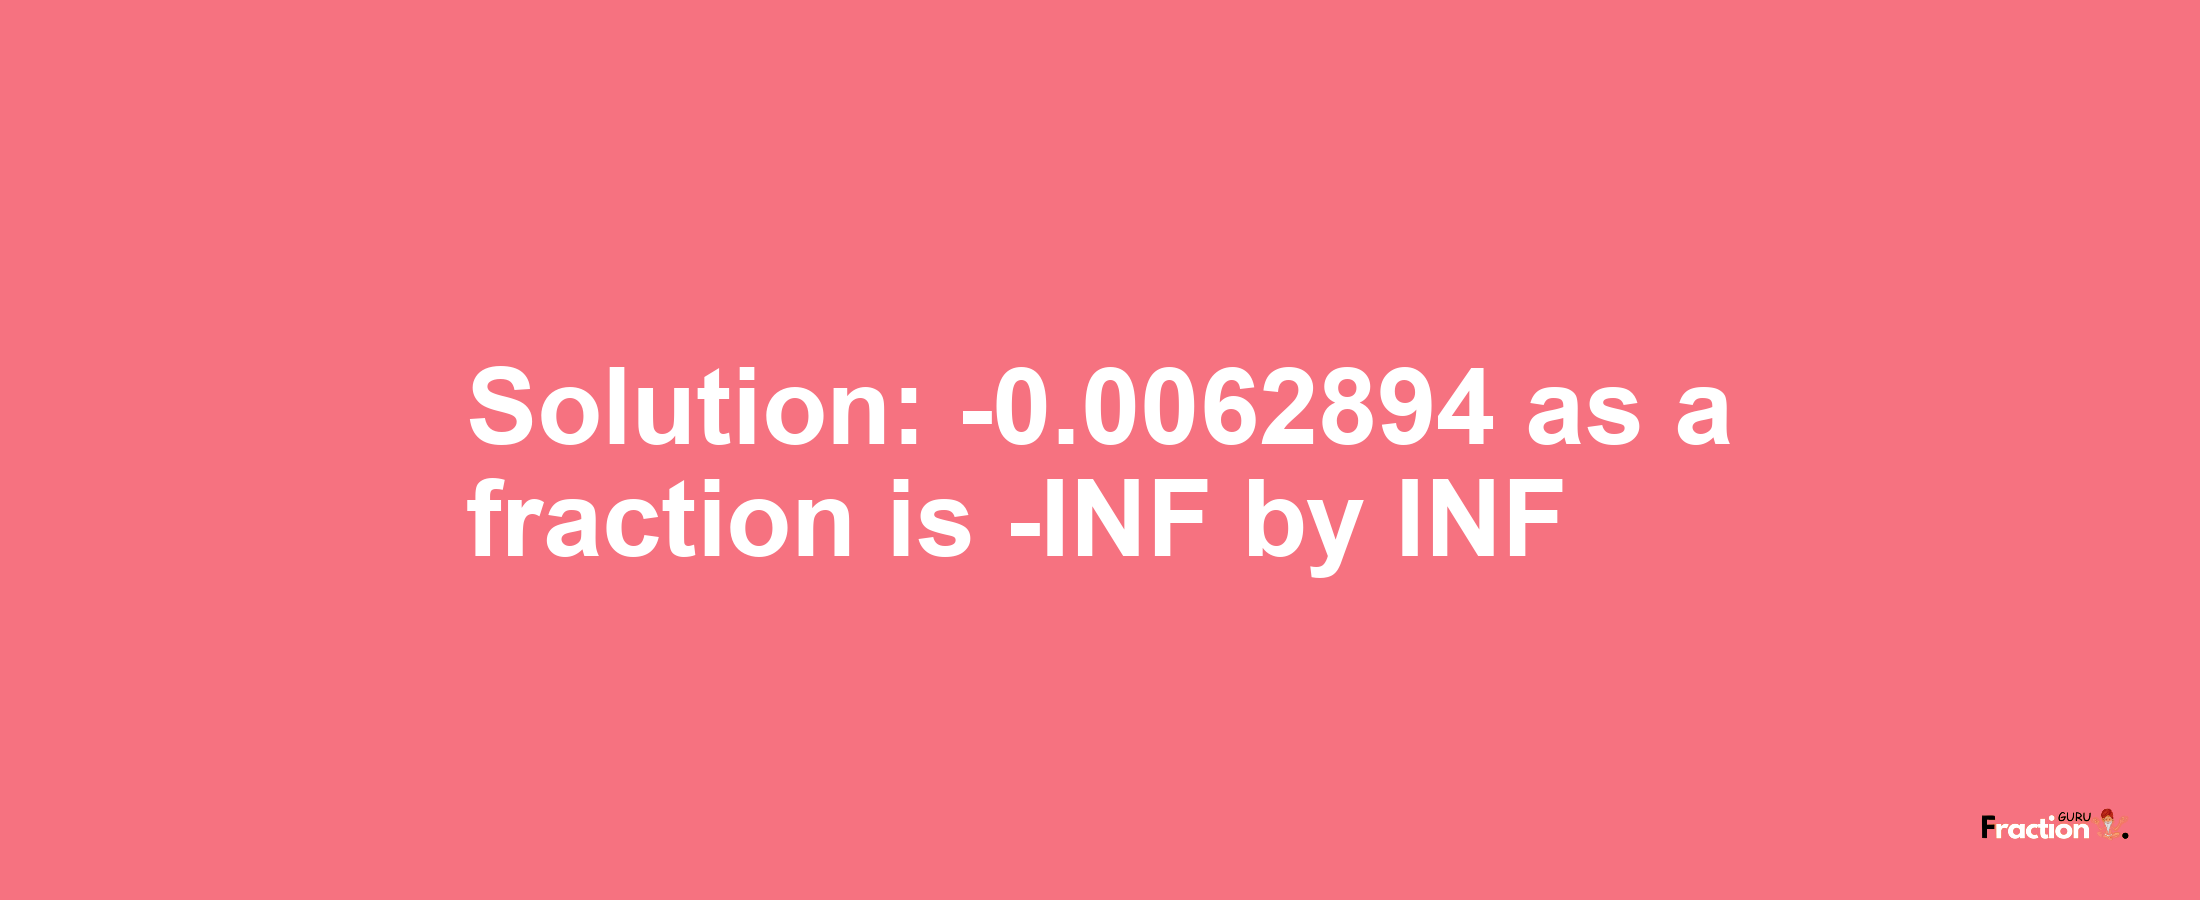 Solution:-0.0062894 as a fraction is -INF/INF